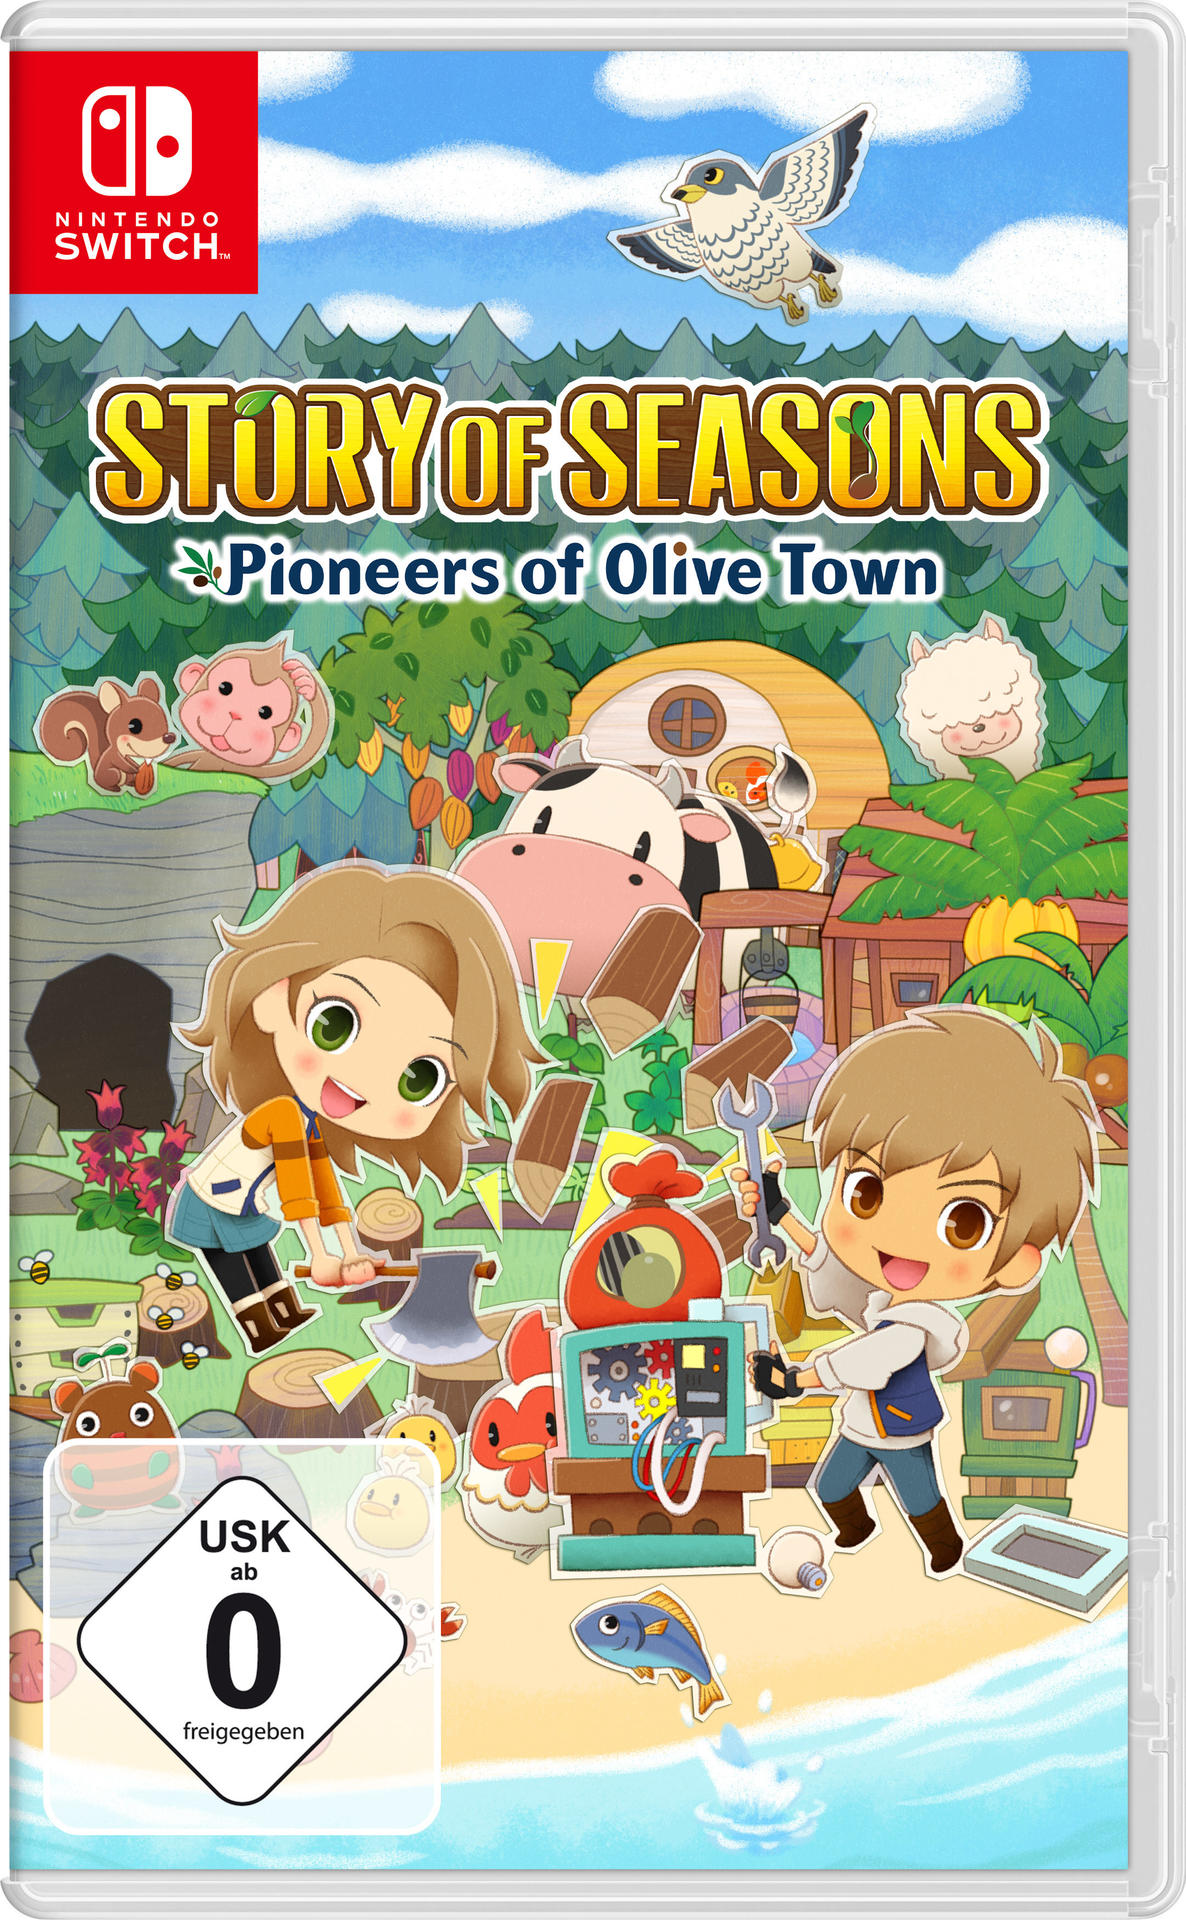 Story of Seasons: Pioneers Switch] Olive [Nintendo of Town 